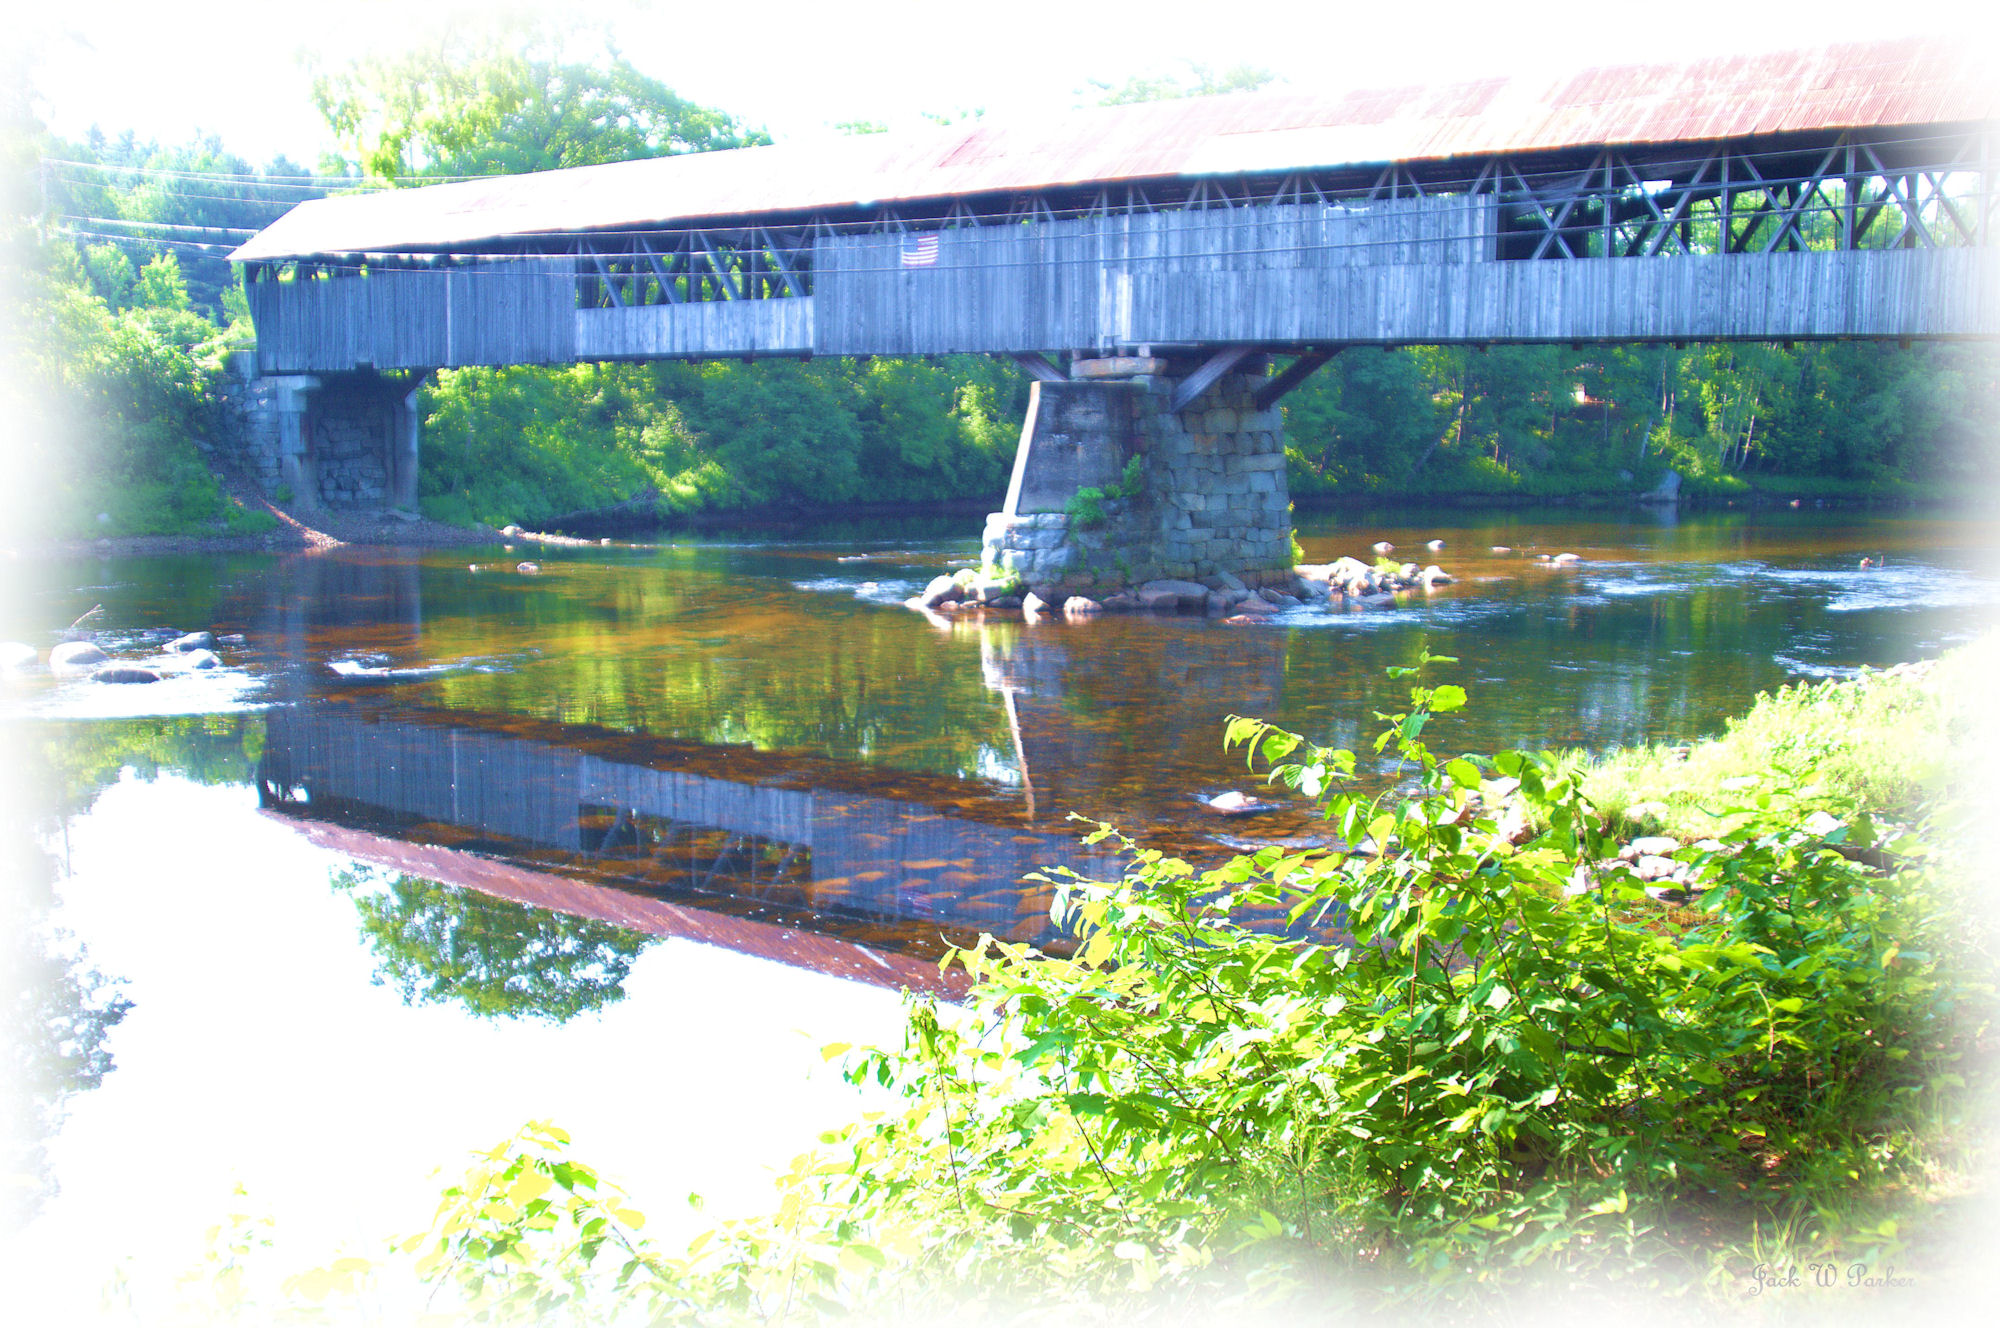 Blair Covered Bridge (user submitted)